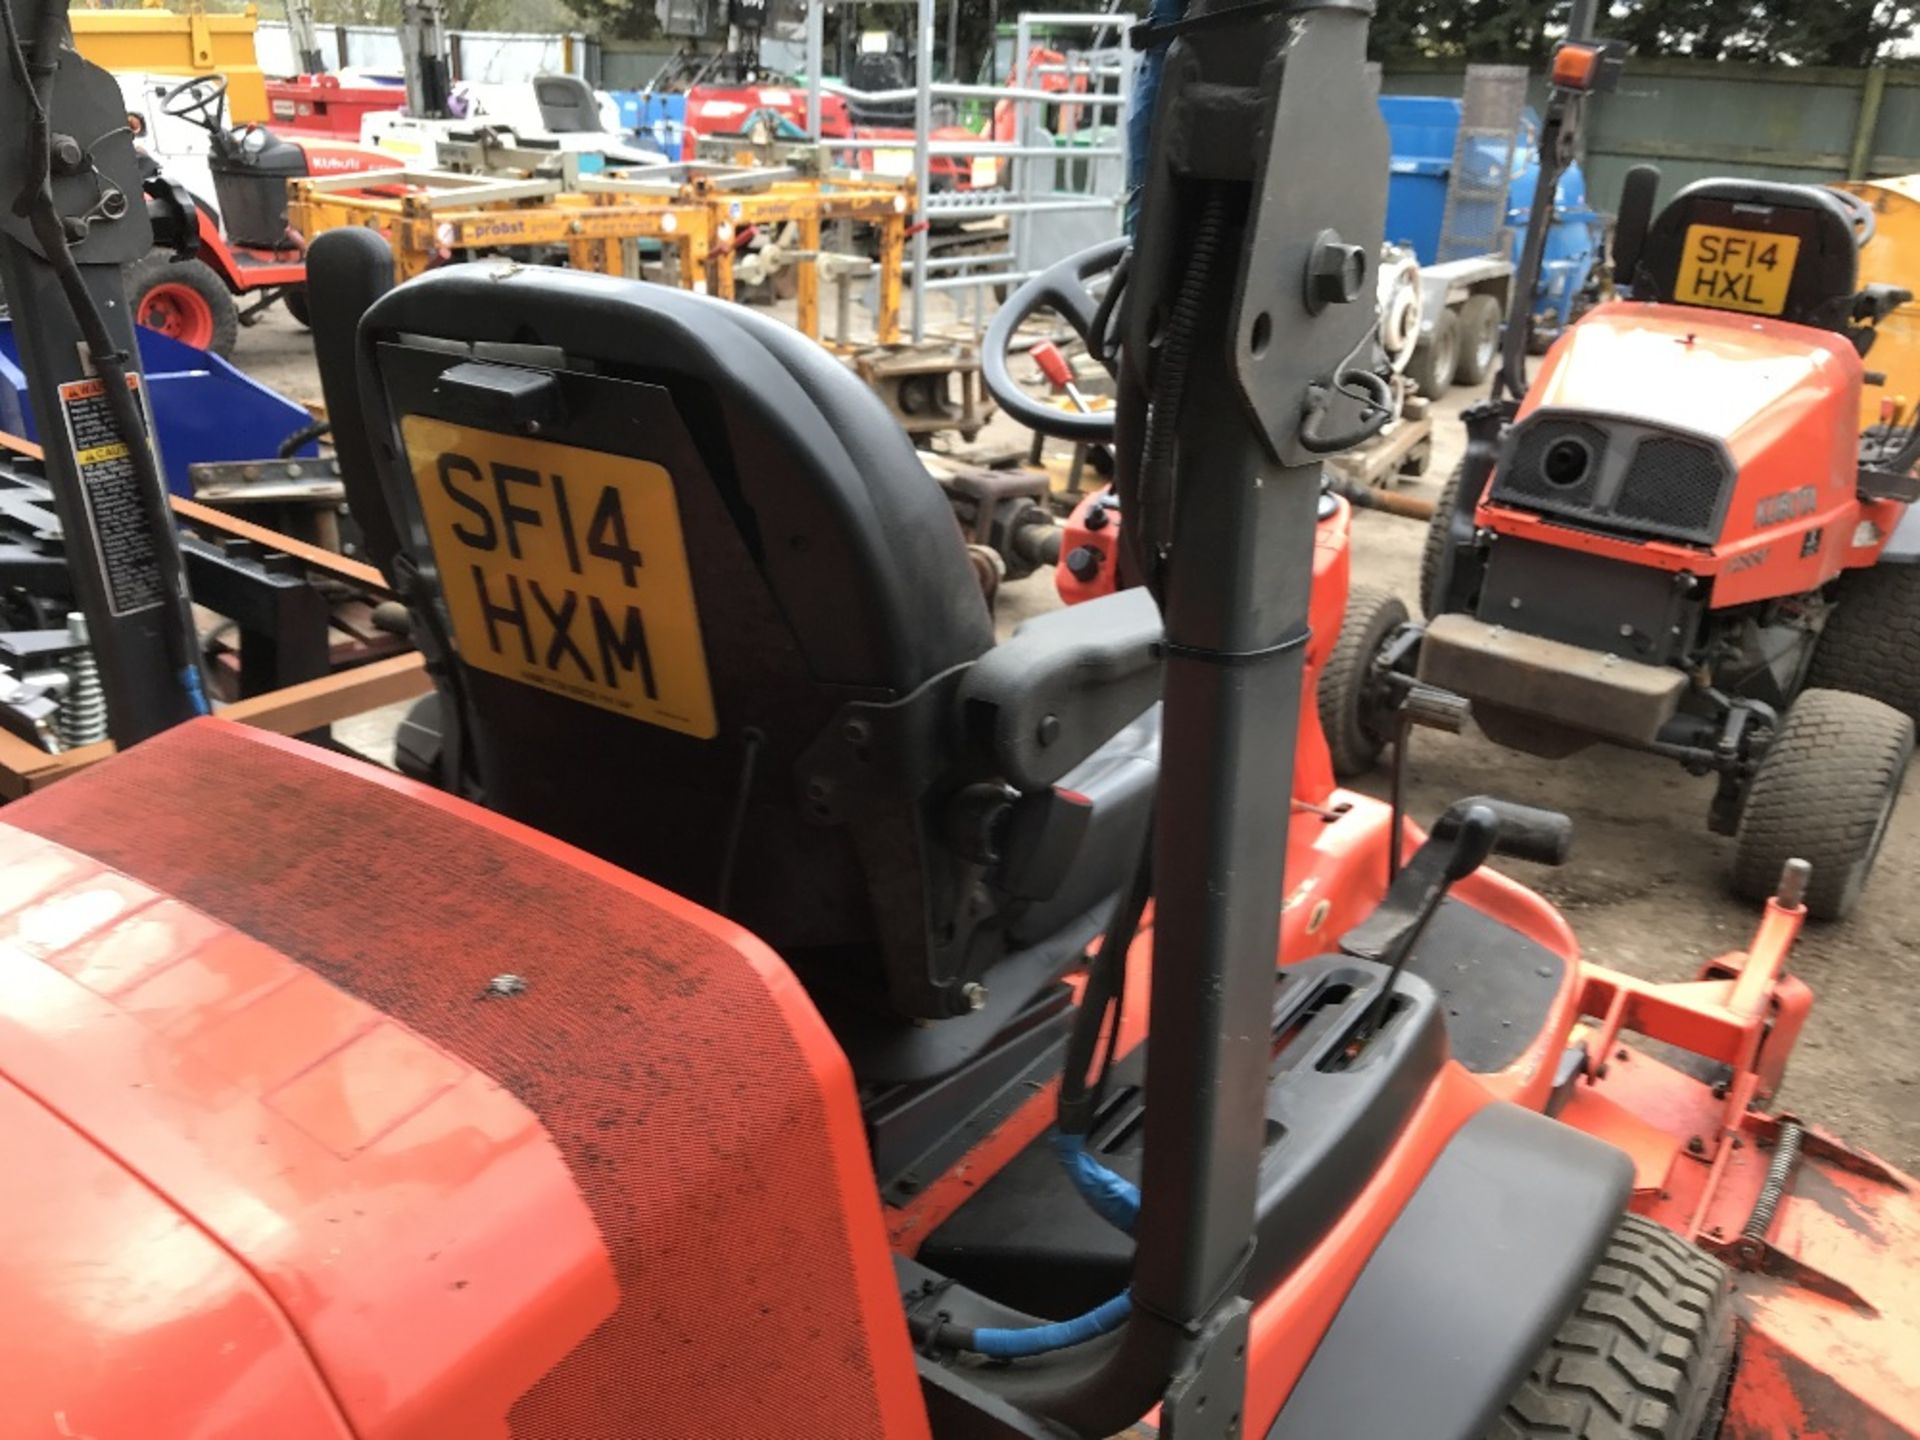 KUBOTA 2880 4WD OUTFRONT MOWER, 2670 REC.HRS. REG: SF14 HXM, V5 TO FOLLOW when tested was seen to - Image 3 of 3